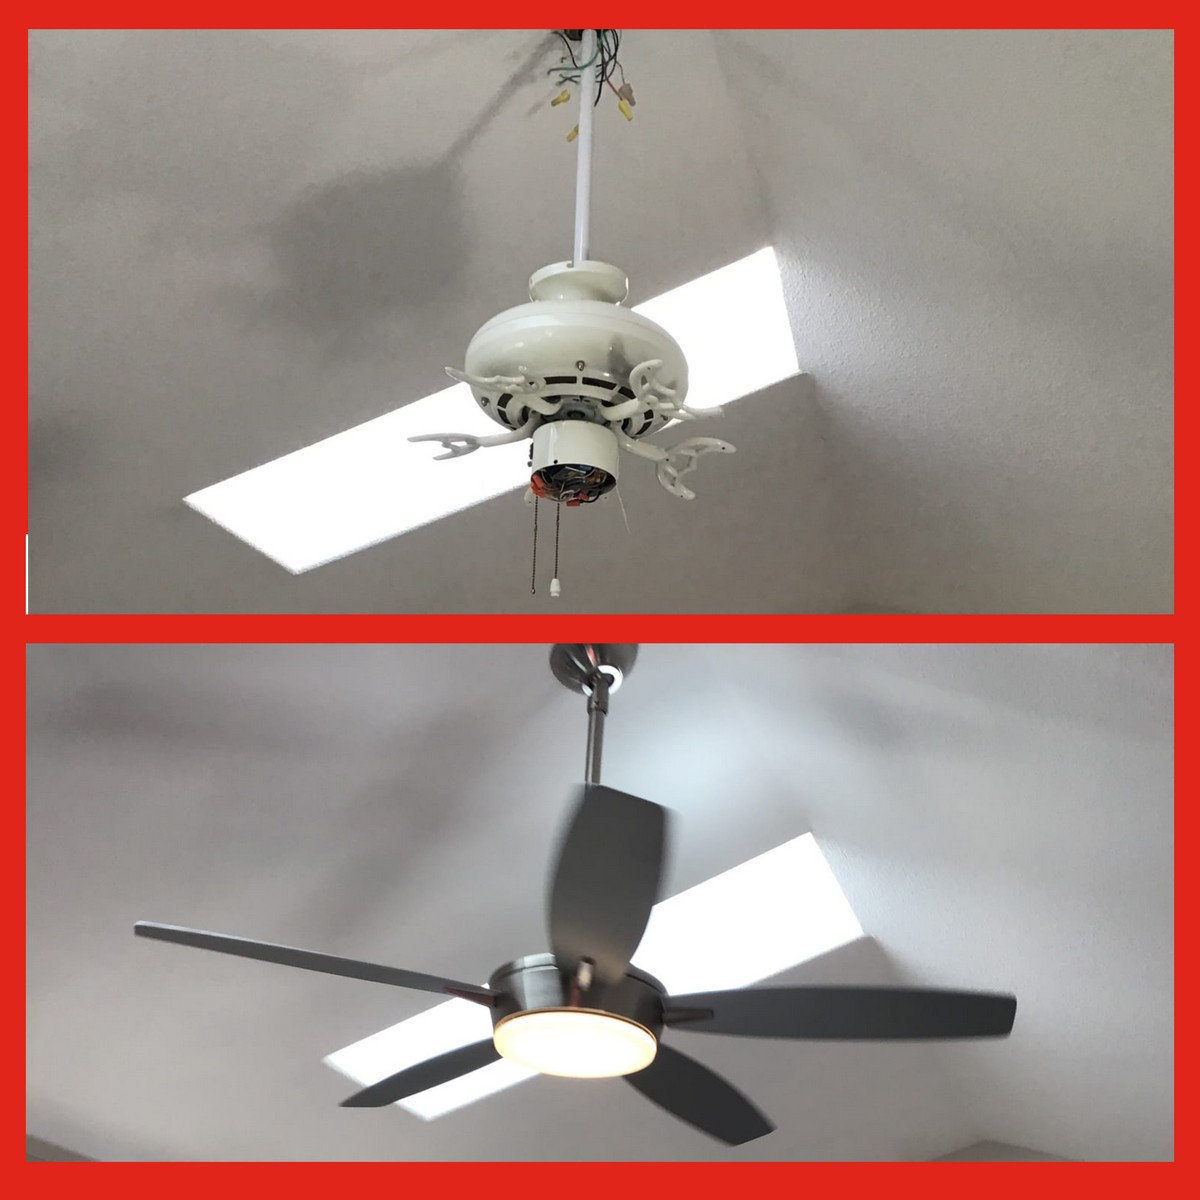 irst image showing an outdated unit with exposed wiring and no blades. Second image shows a brand-new 5-blade unit with a built-in light fixture.